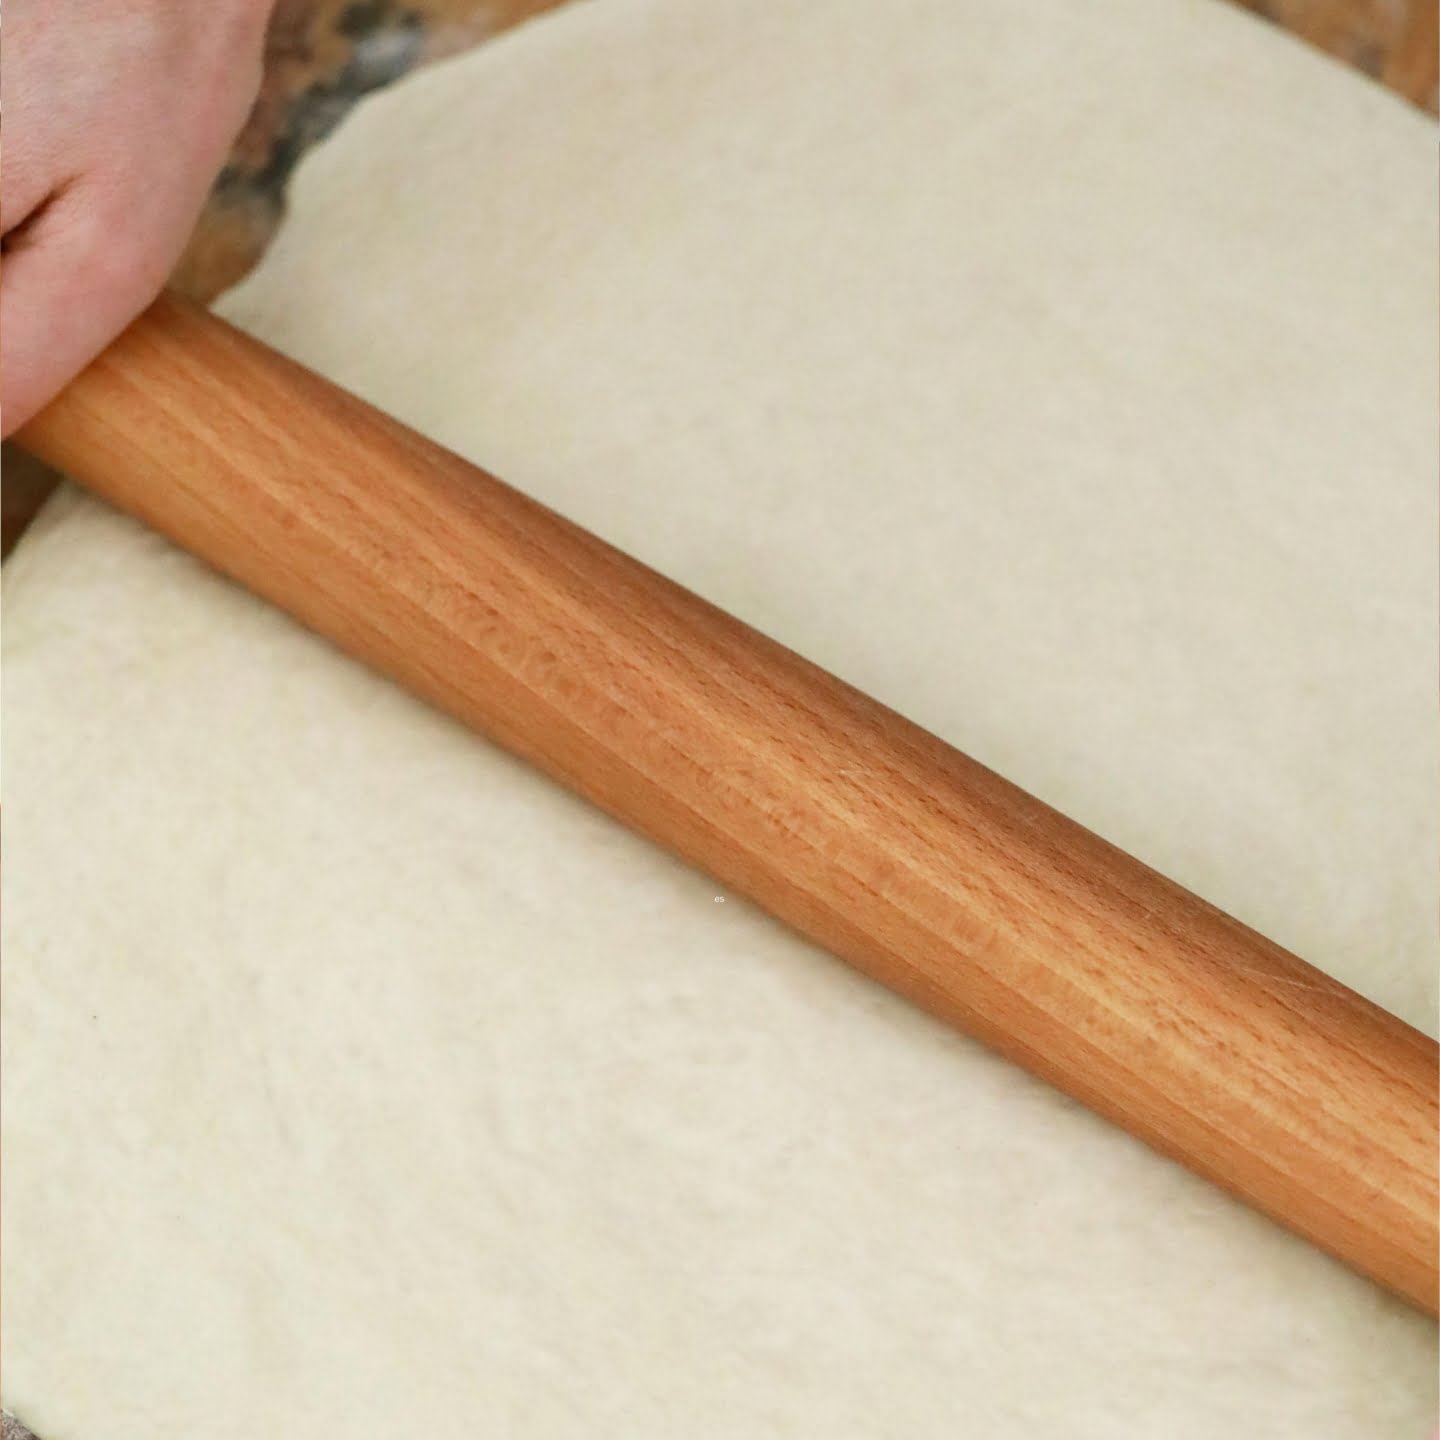 Rolling the dough